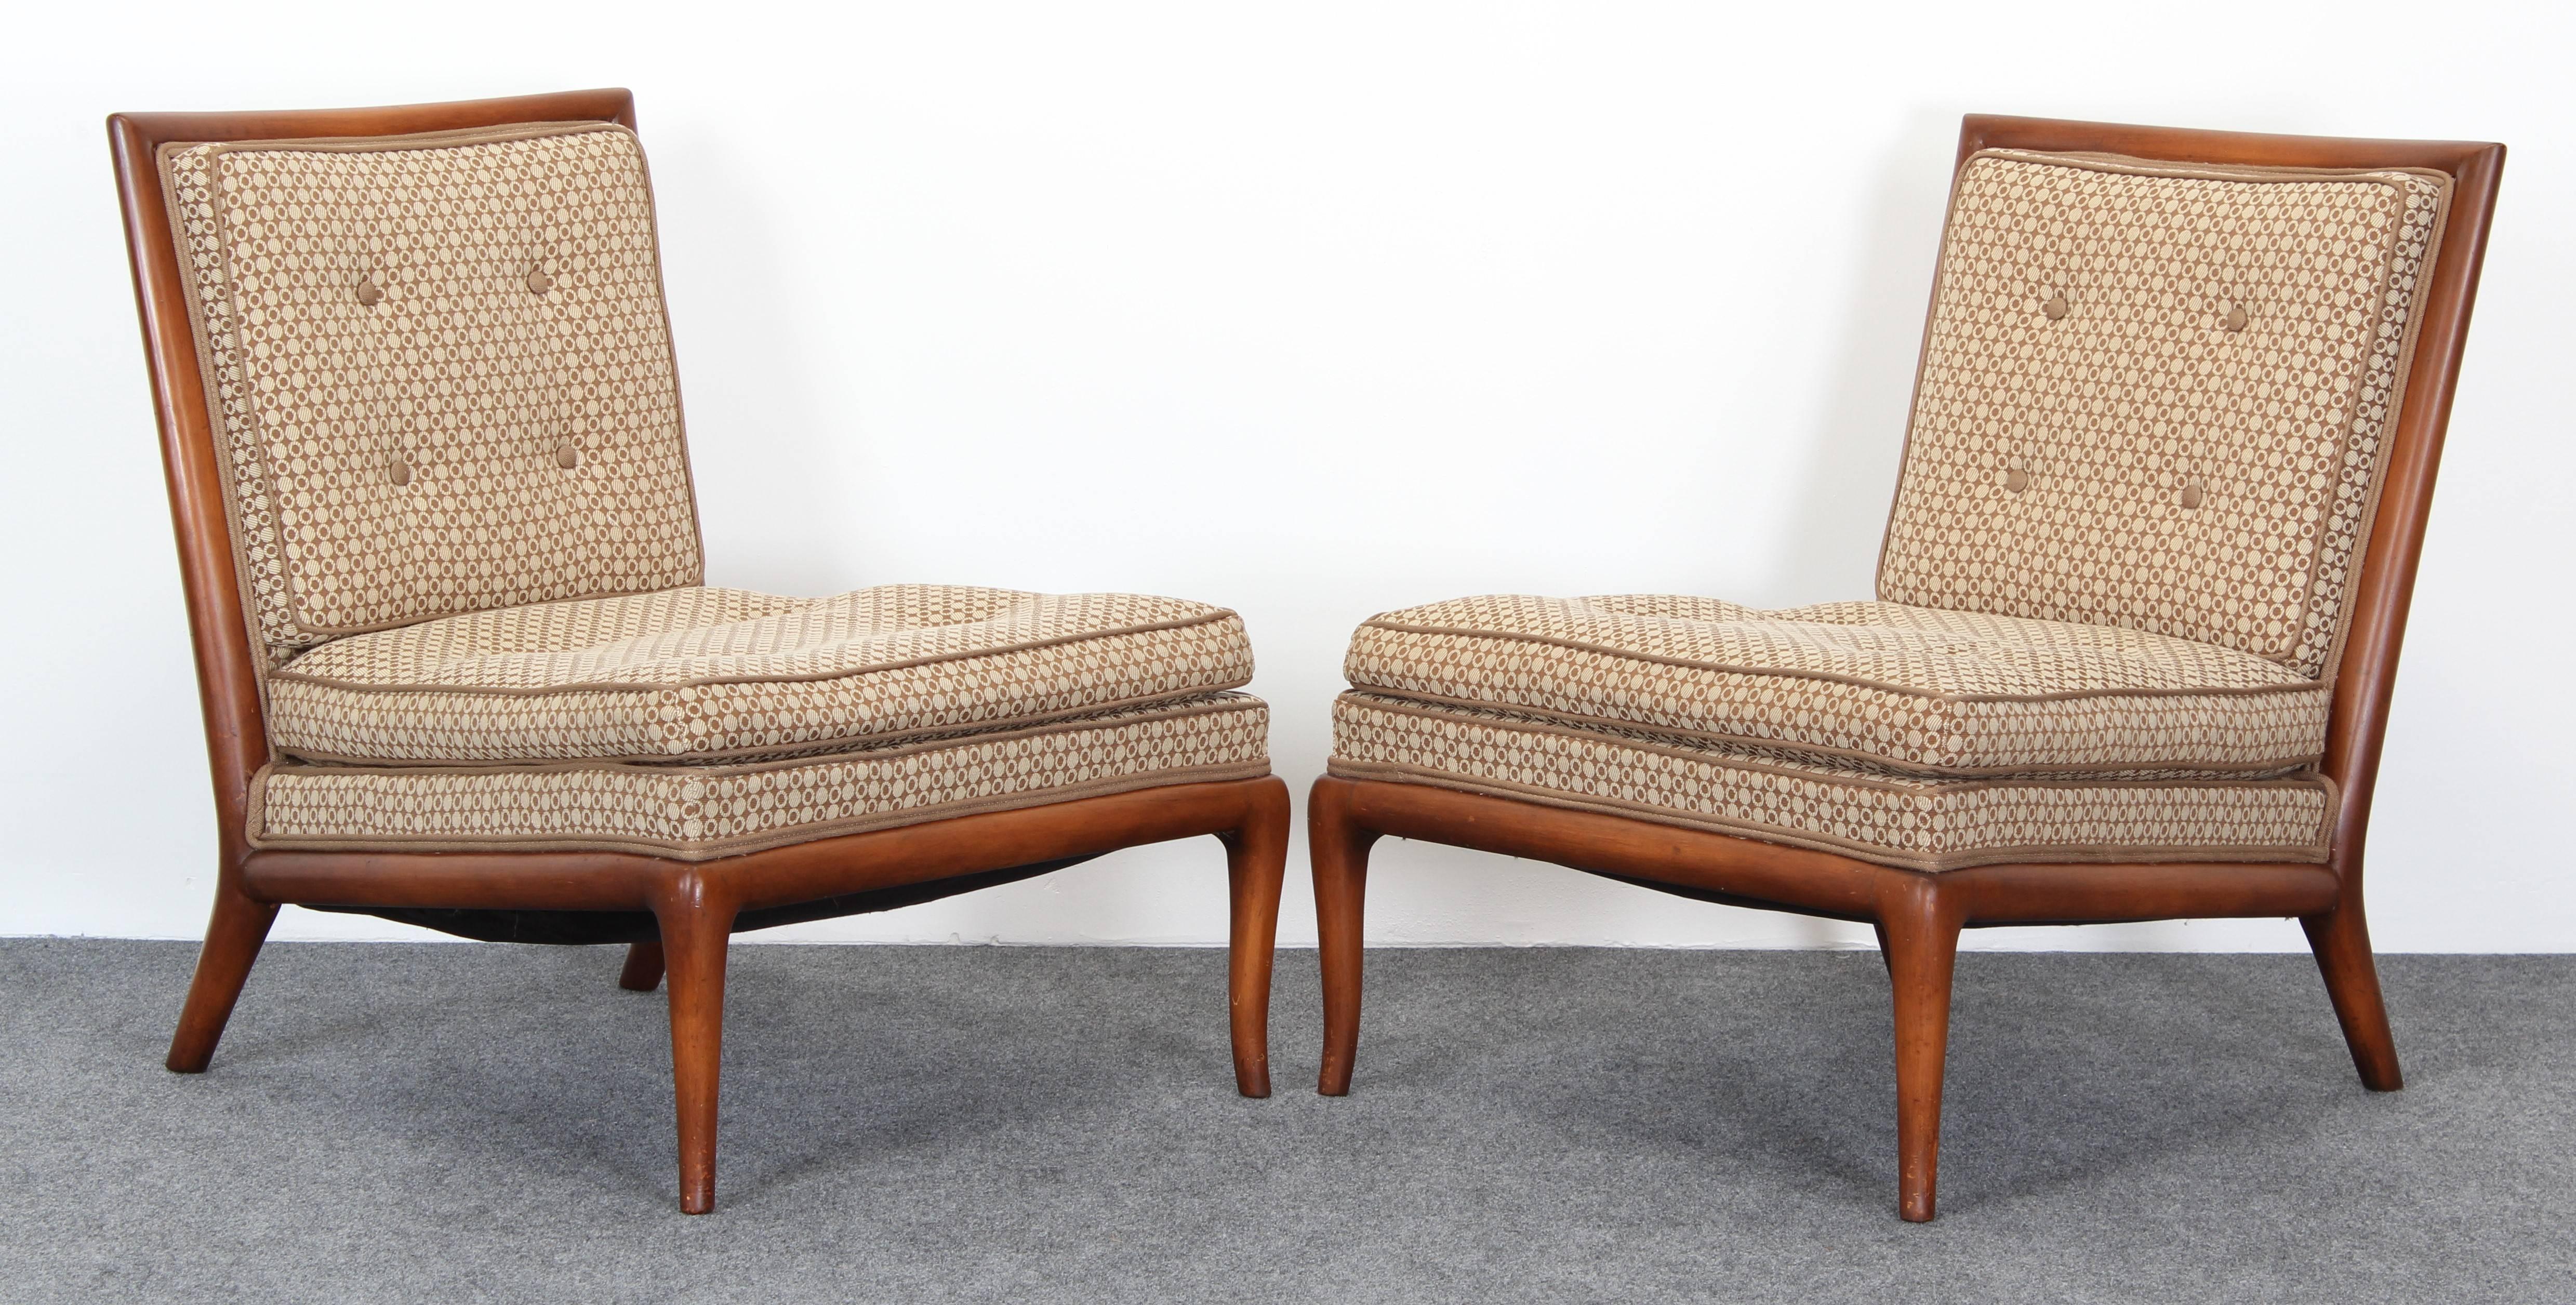 A elegant pair of T.H. Robsjohn-Gibbings slipper chairs. Upholstery and wood are in good condition with age appropriate wear as shown in images. Slight hair line to wood but can be filled easilly when refinishing and upholstering. Structurally sound.